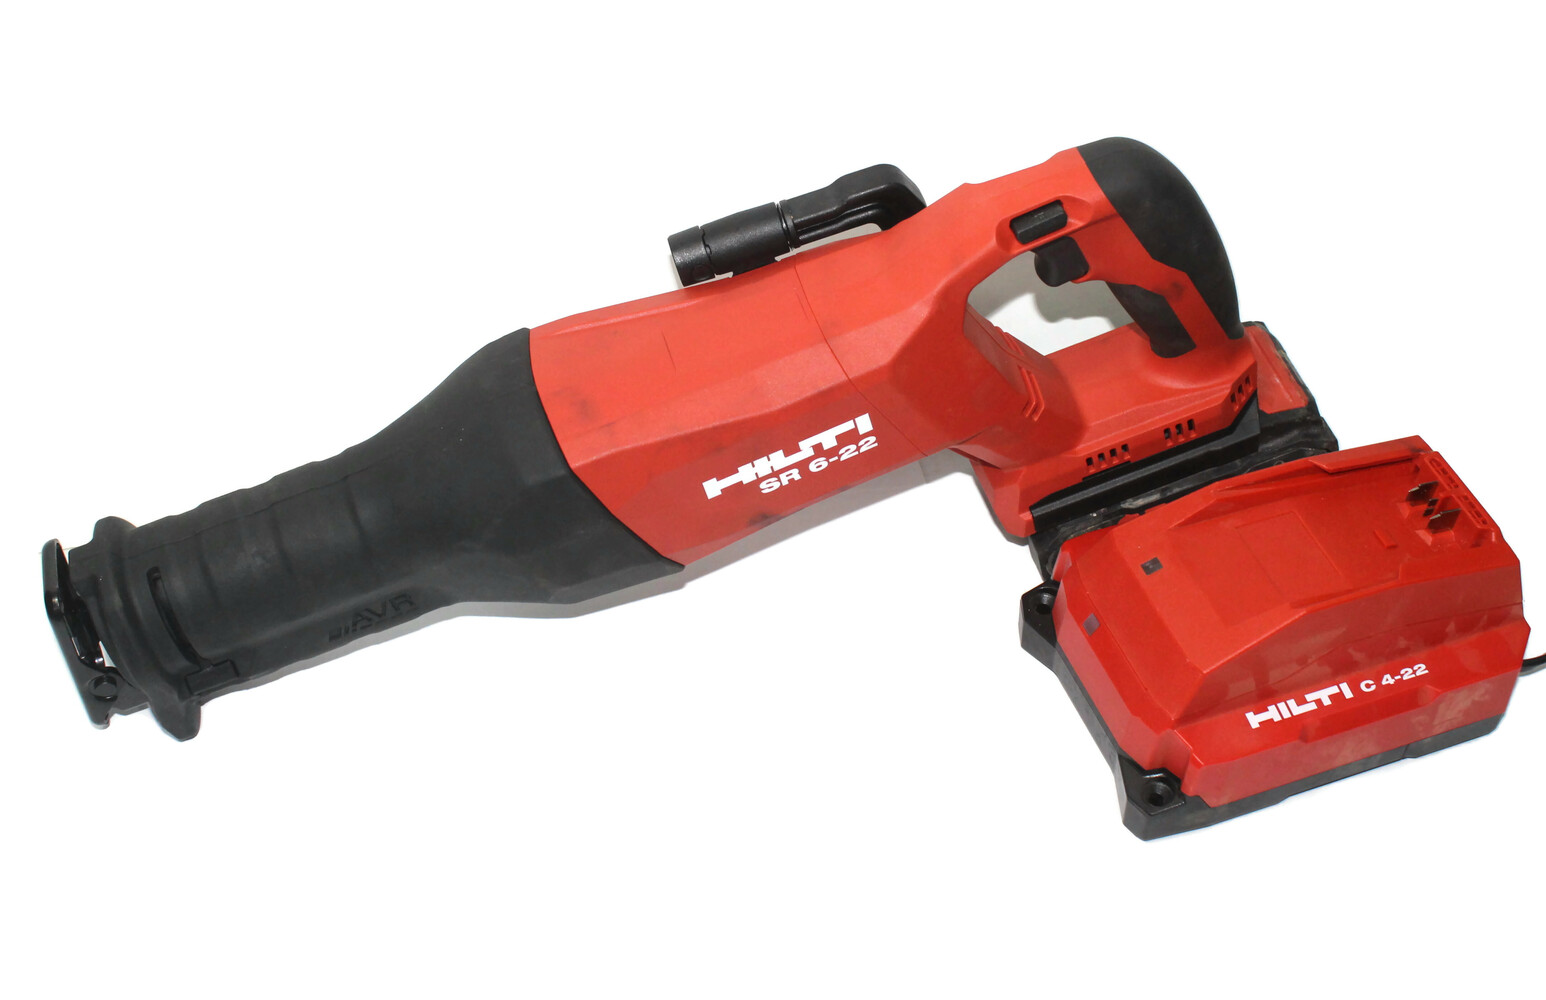 Hilti sr 6-22 Reciprocating Saw with Battery and Charger